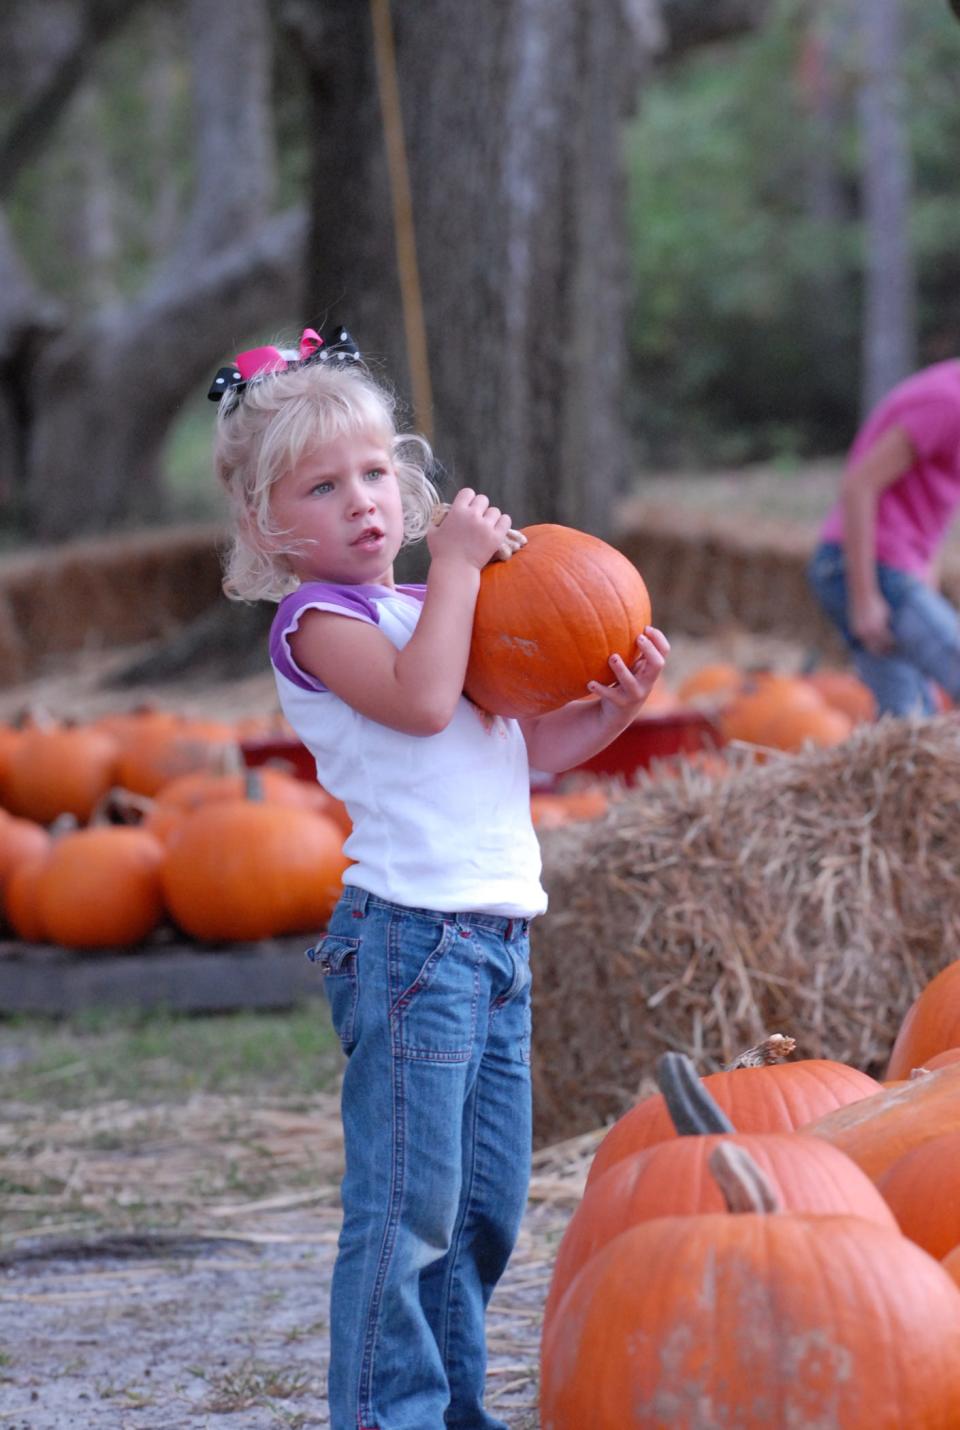 In this photo from Oct. 2007, five-year-old Josie Boyd of Hampstead picks a pumpkin at the Hampstead United Methodist Church Youth Pumpkin Patch.